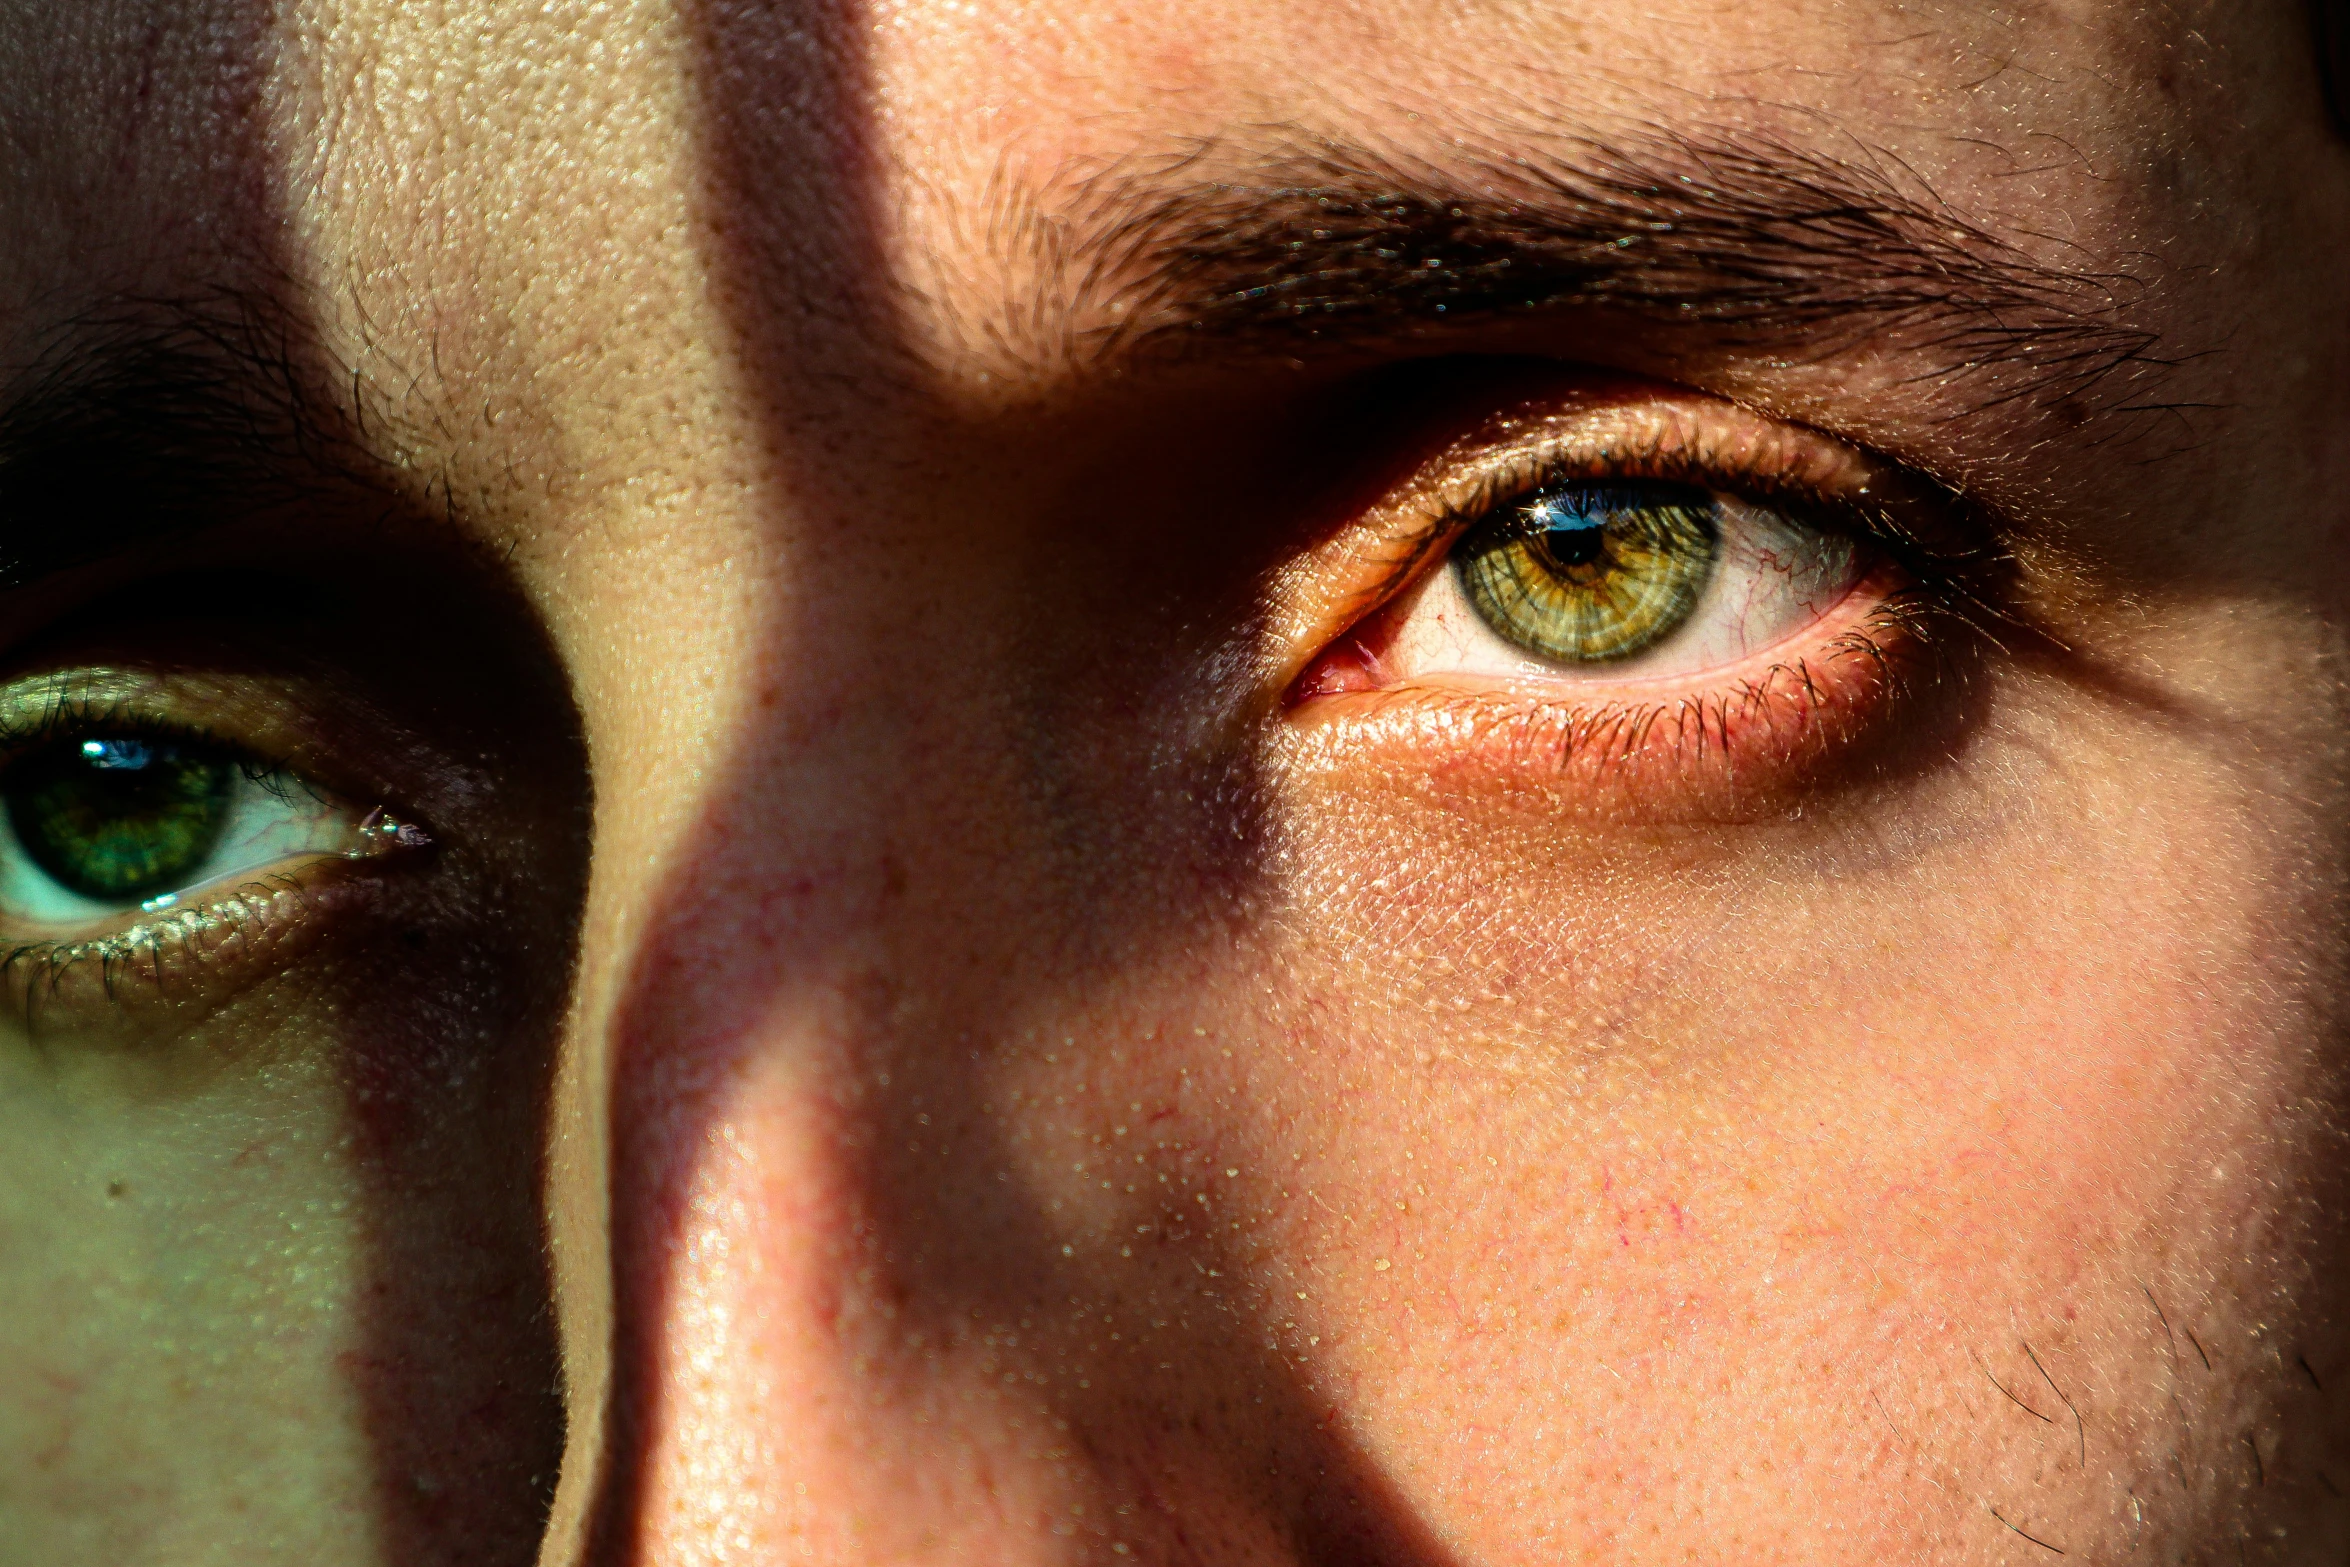 a close up of a persons eye with one green eye and the other a yellow eye